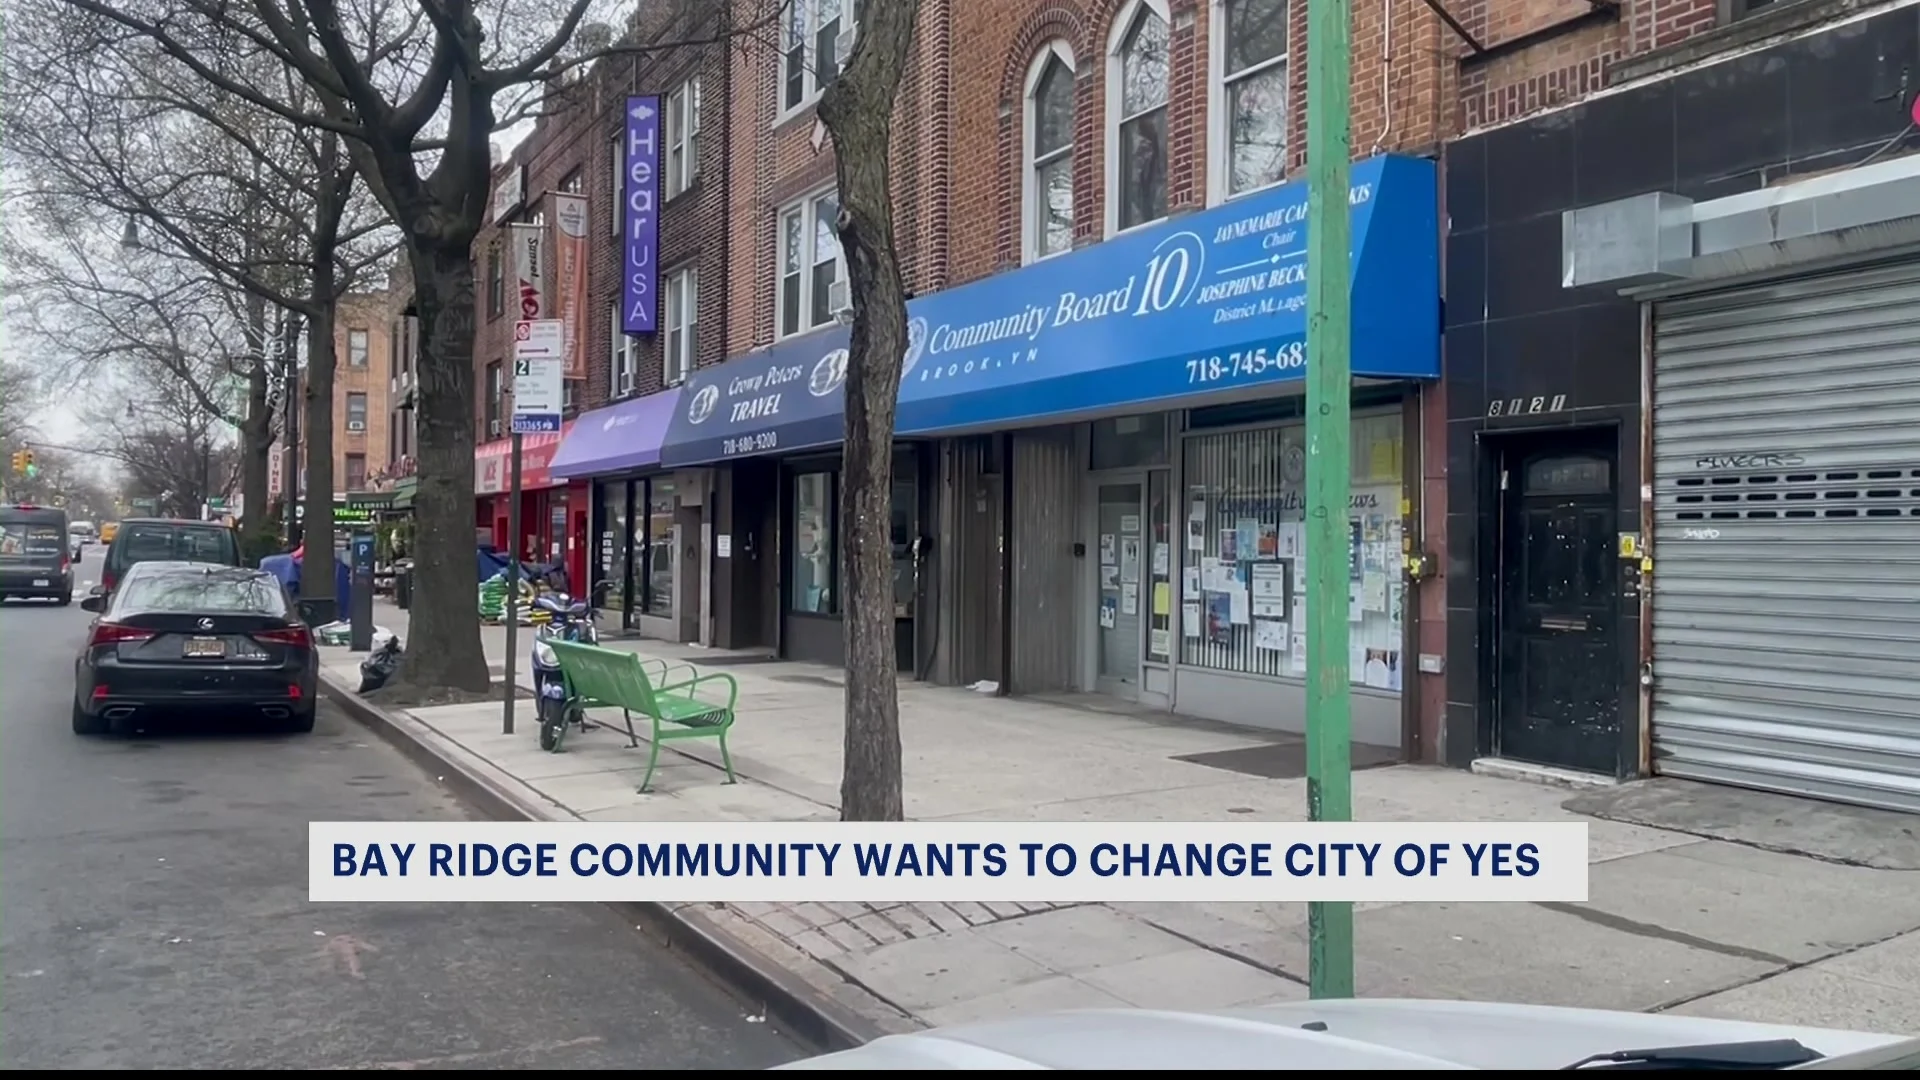 Bay Ridge business owners and community board express mixed feelings about ‘City of Yes’ plan